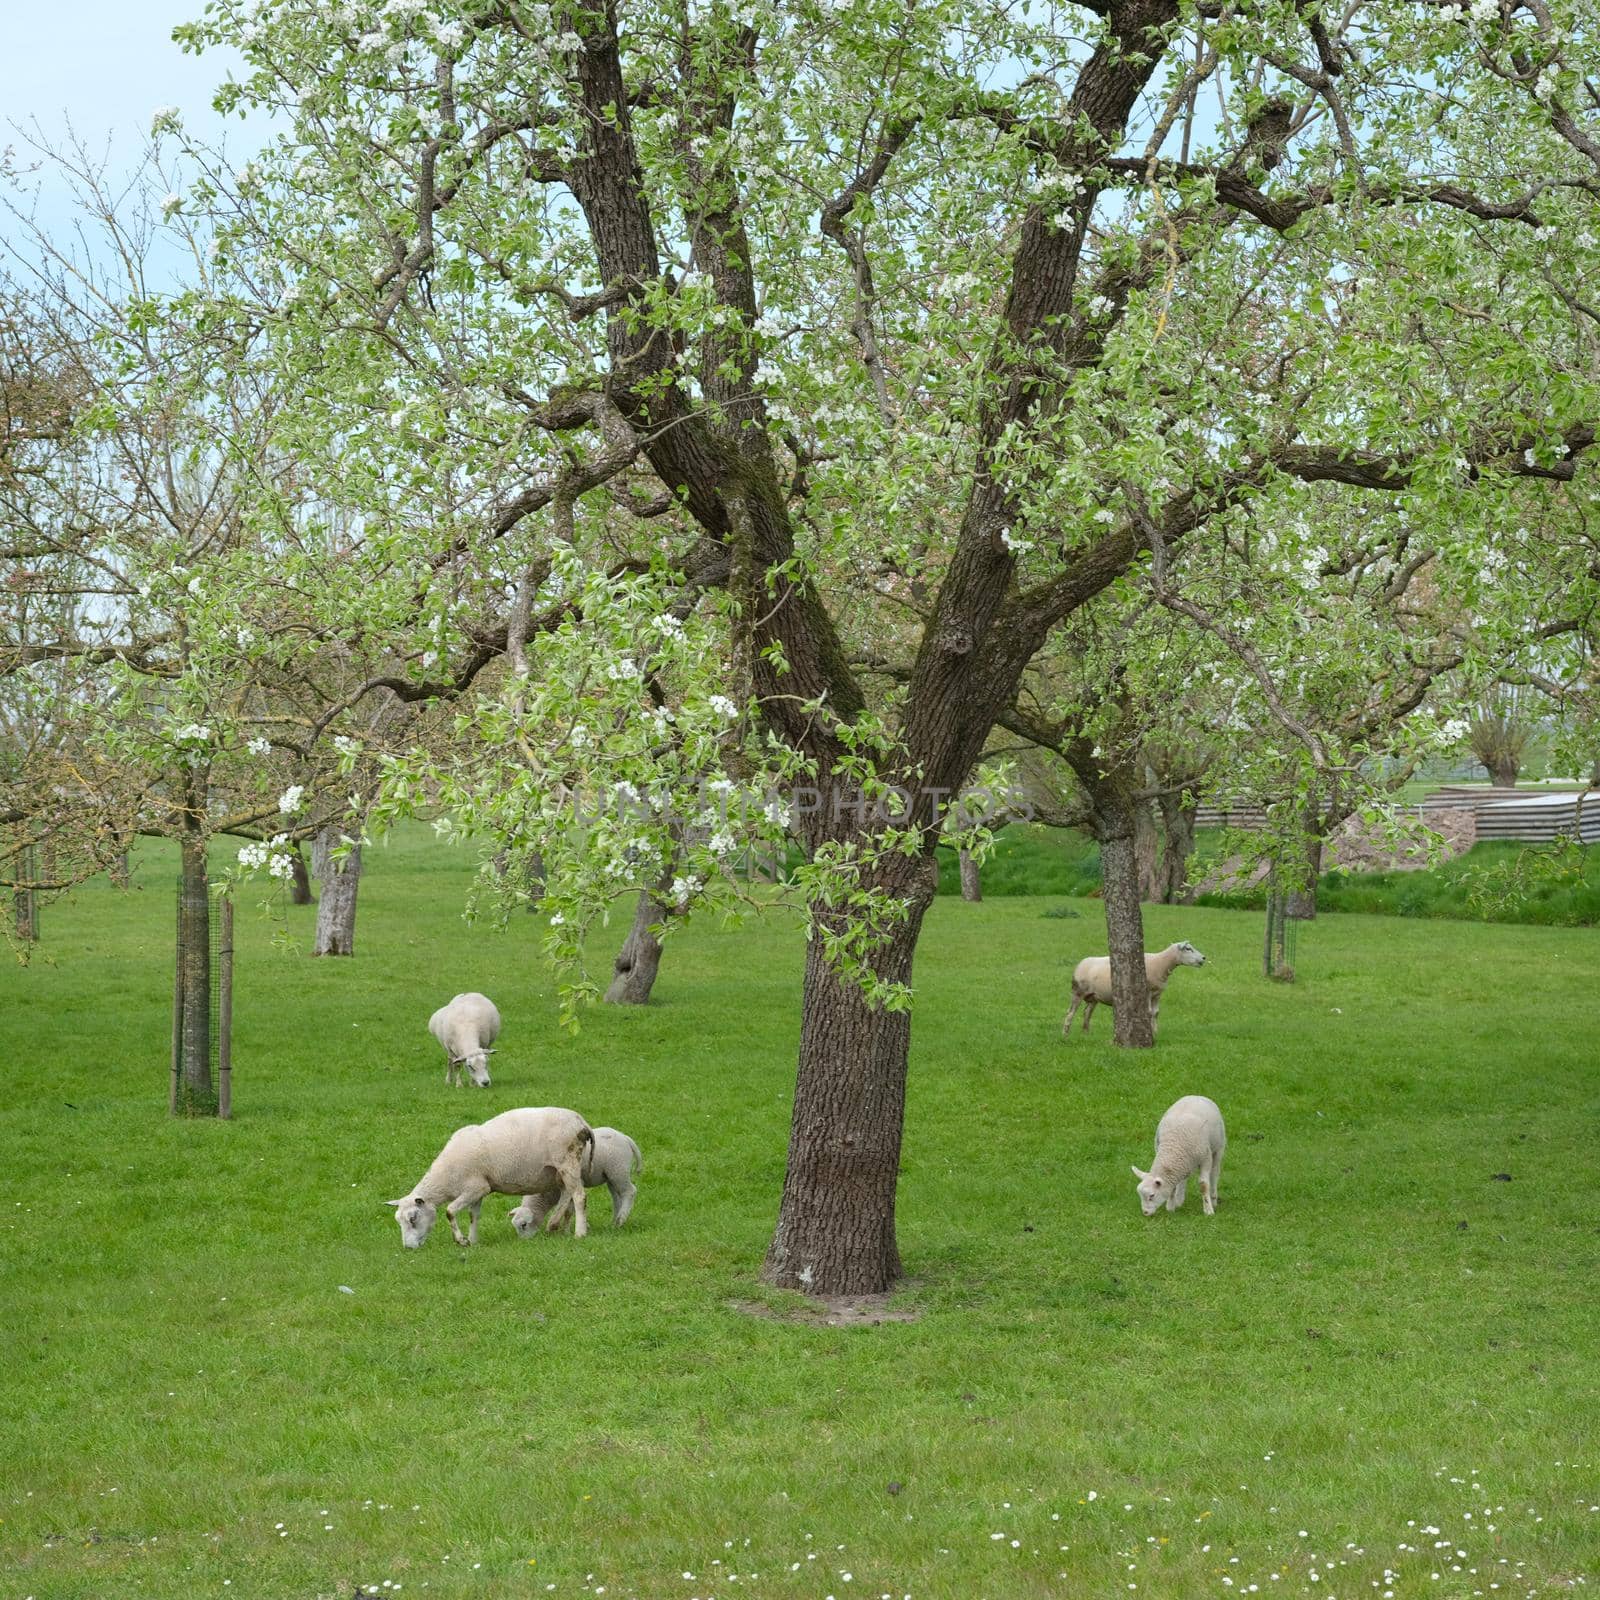 sheep and lambs in spring orchard under blue sky by ahavelaar